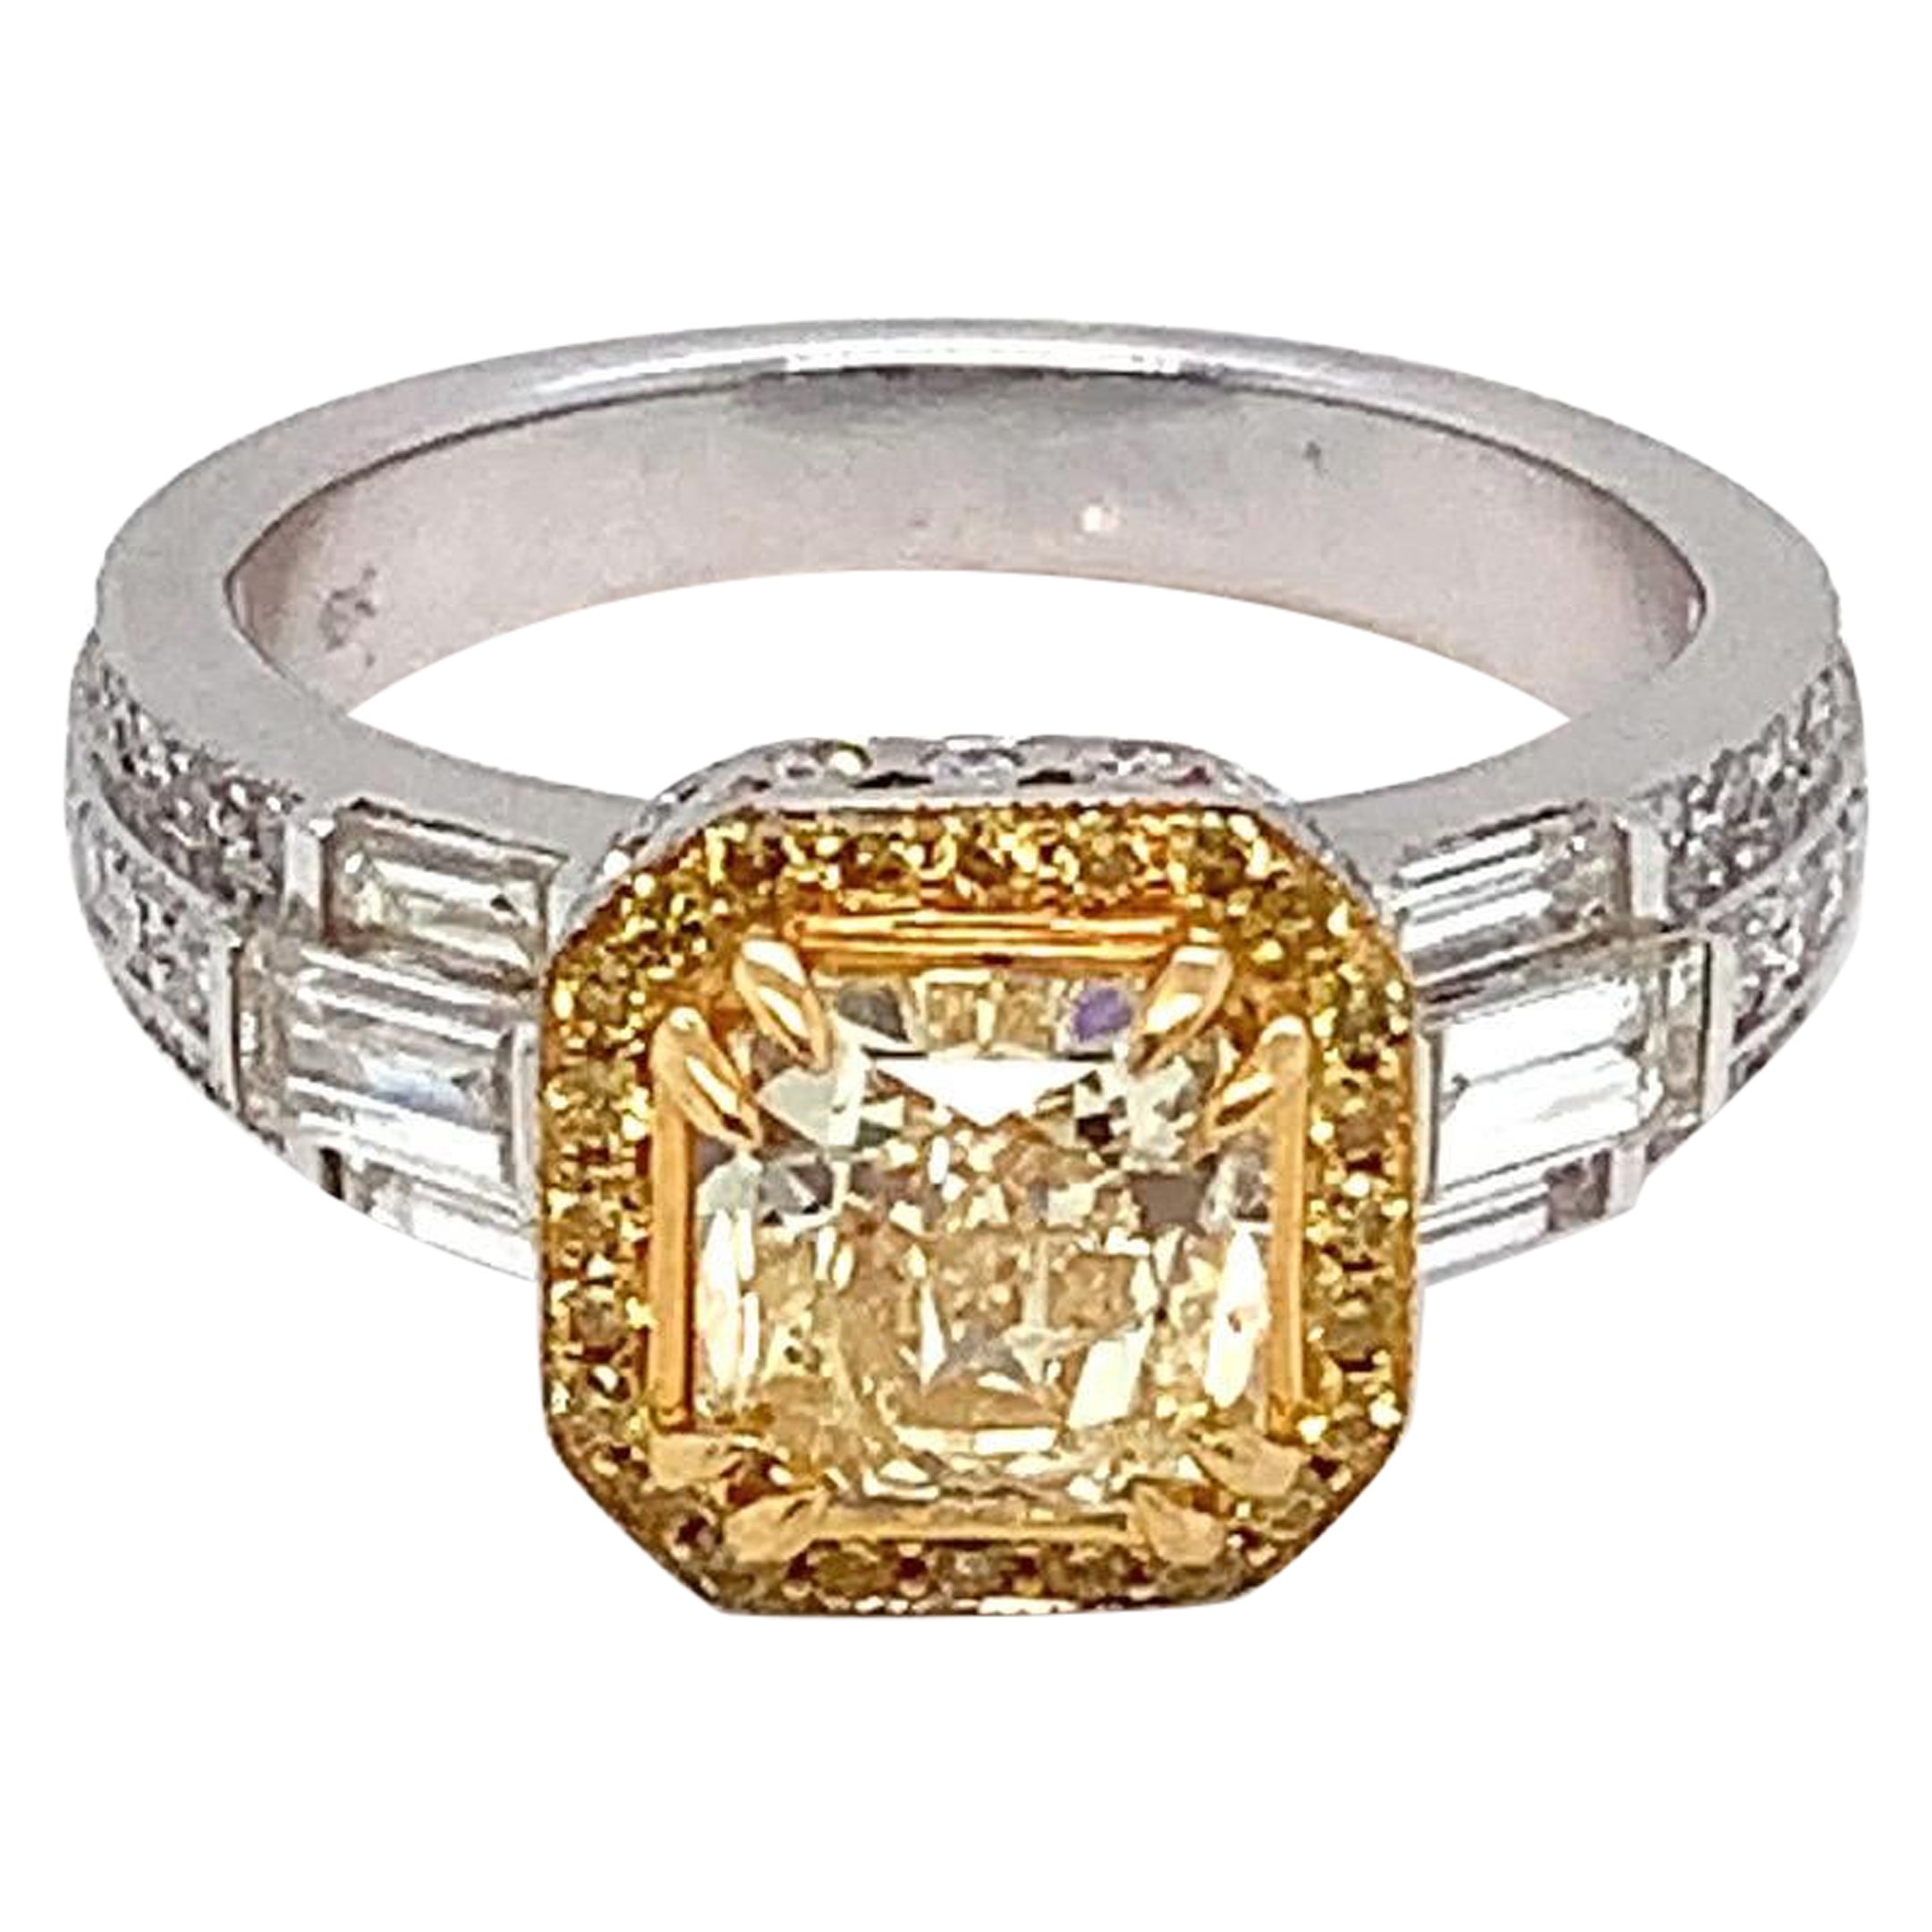 GIA Certified 1.59 Carat Fancy Yellow Diamond Cocktail Ring For Sale